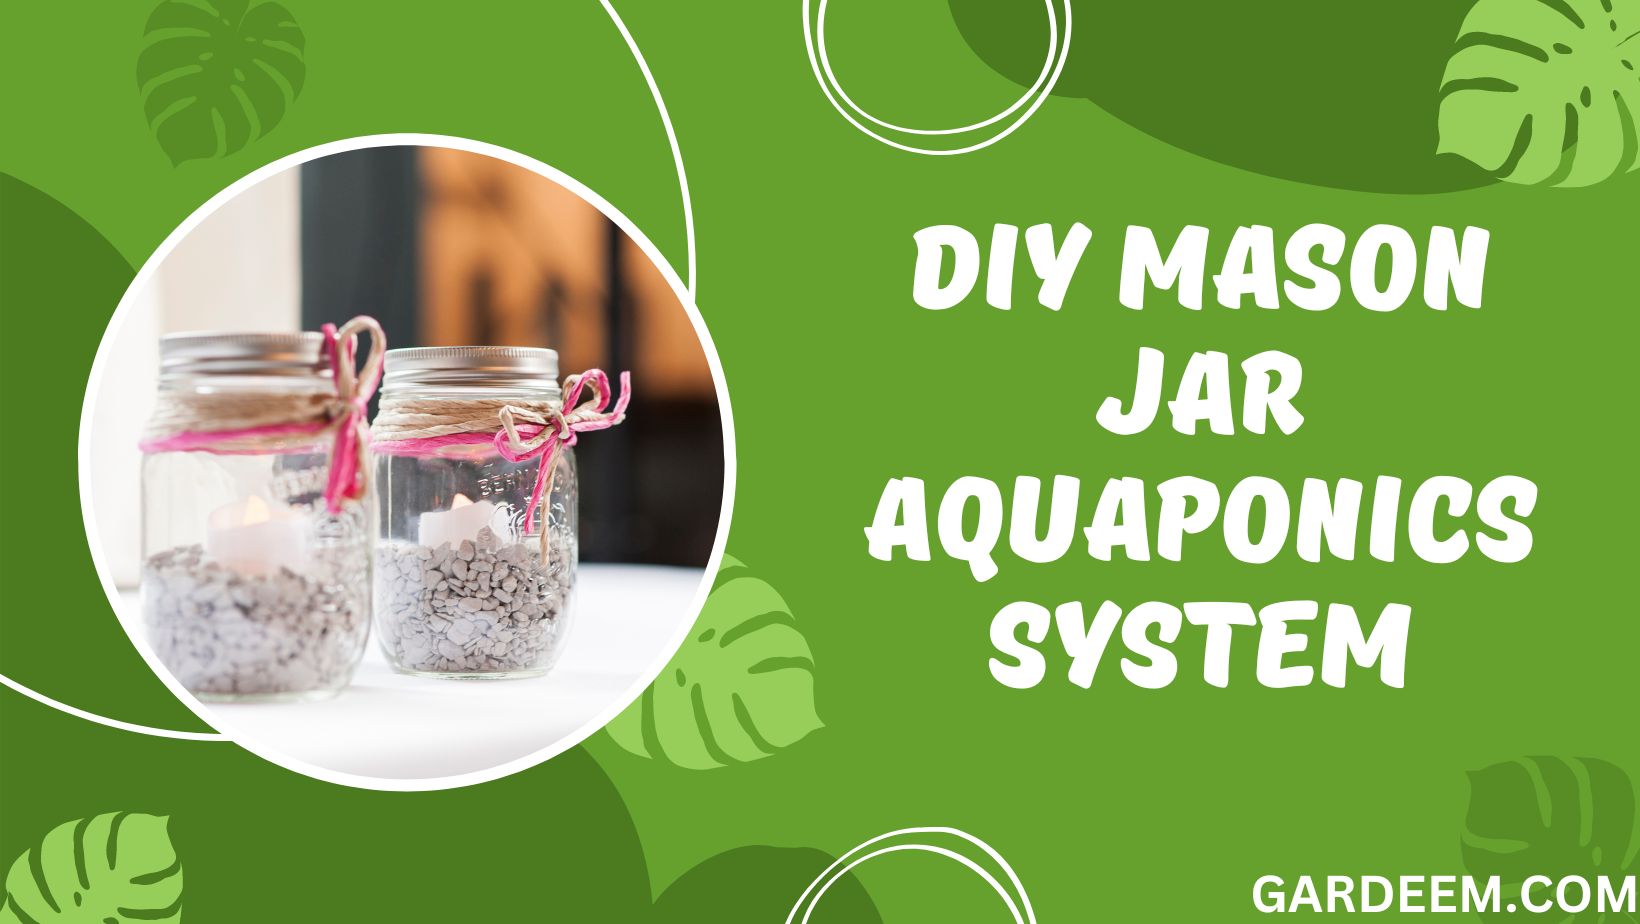 How To Build Your Own Mason Jar Aquaponics System